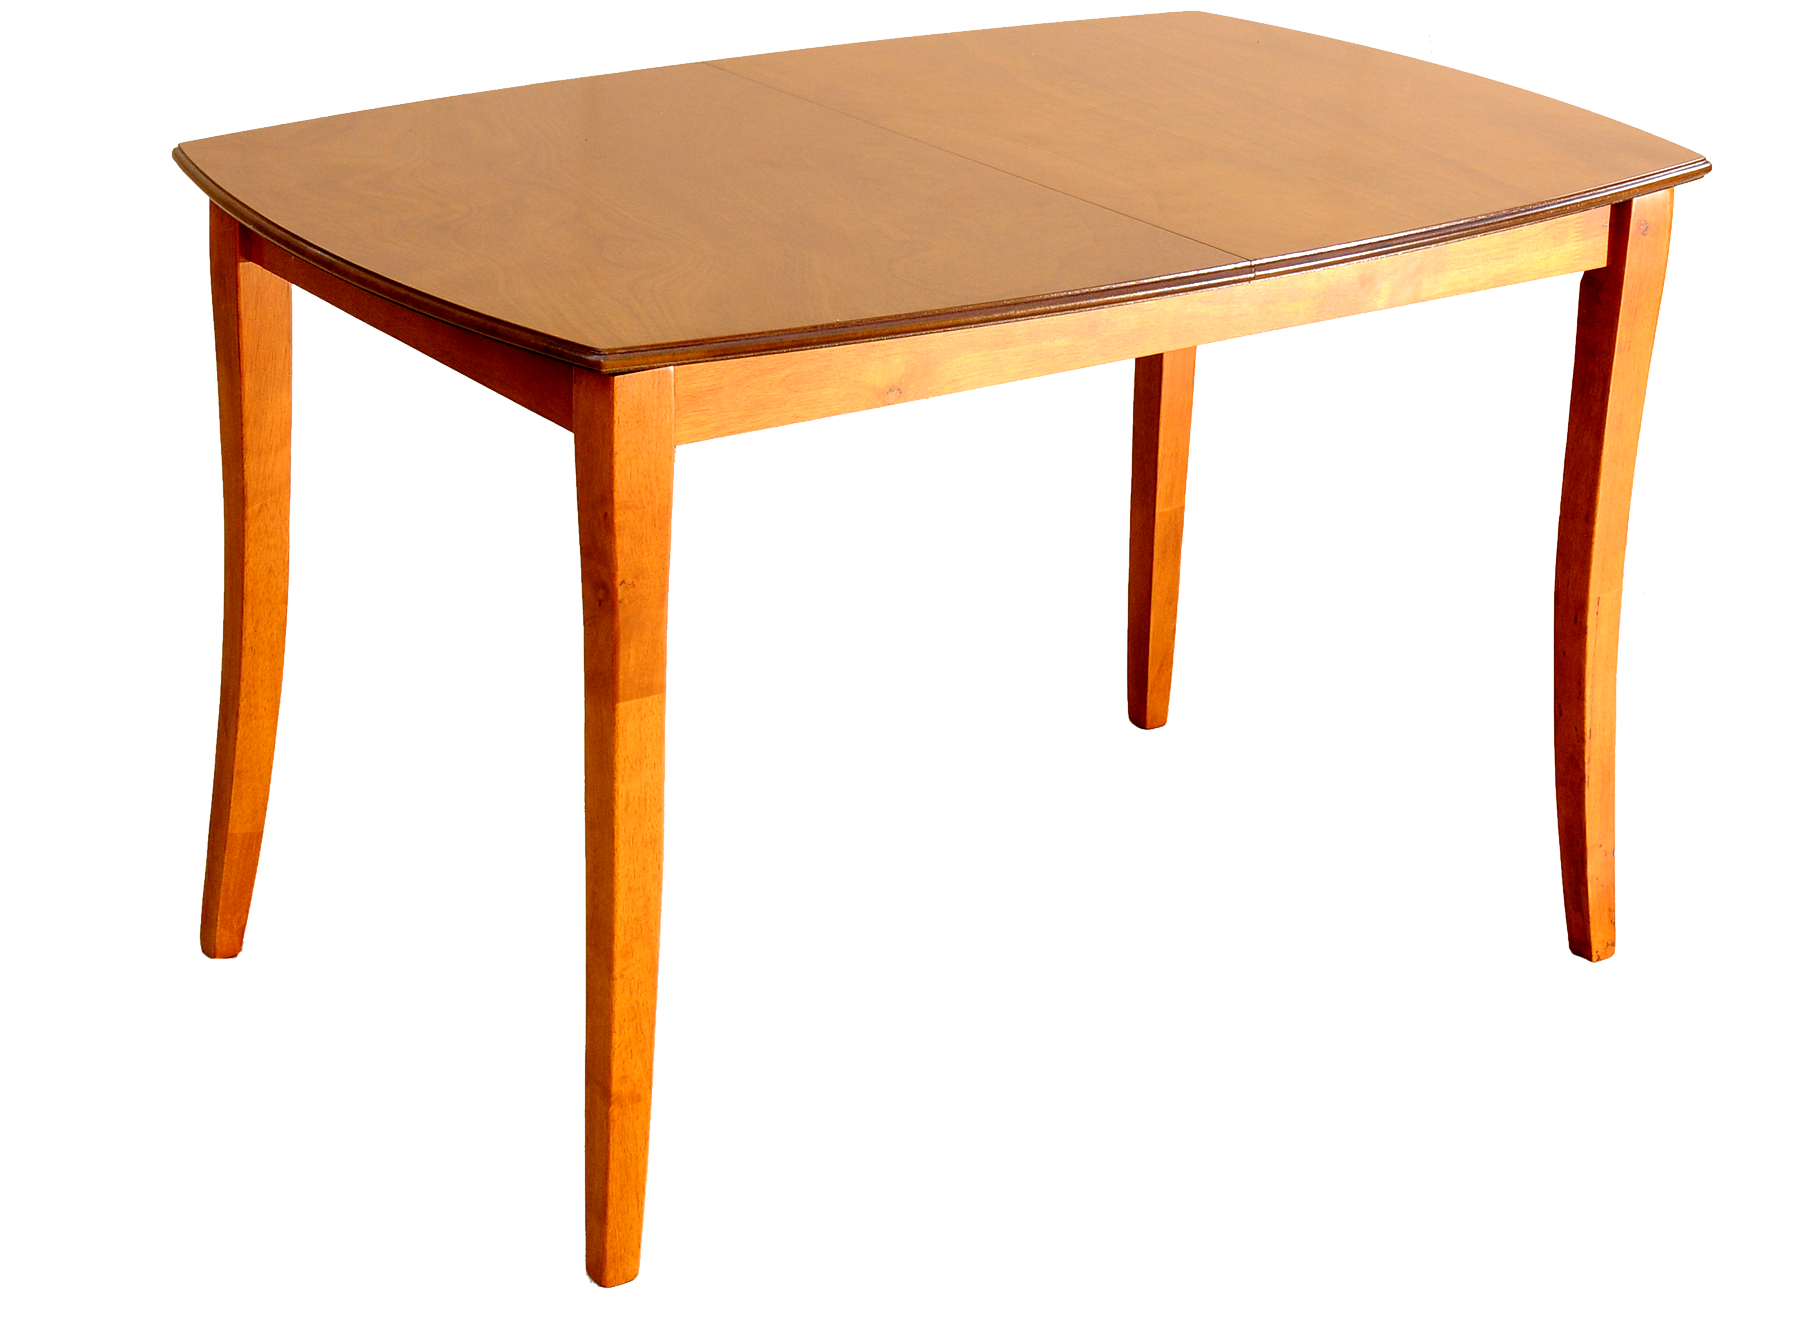 A Table With A Black Background